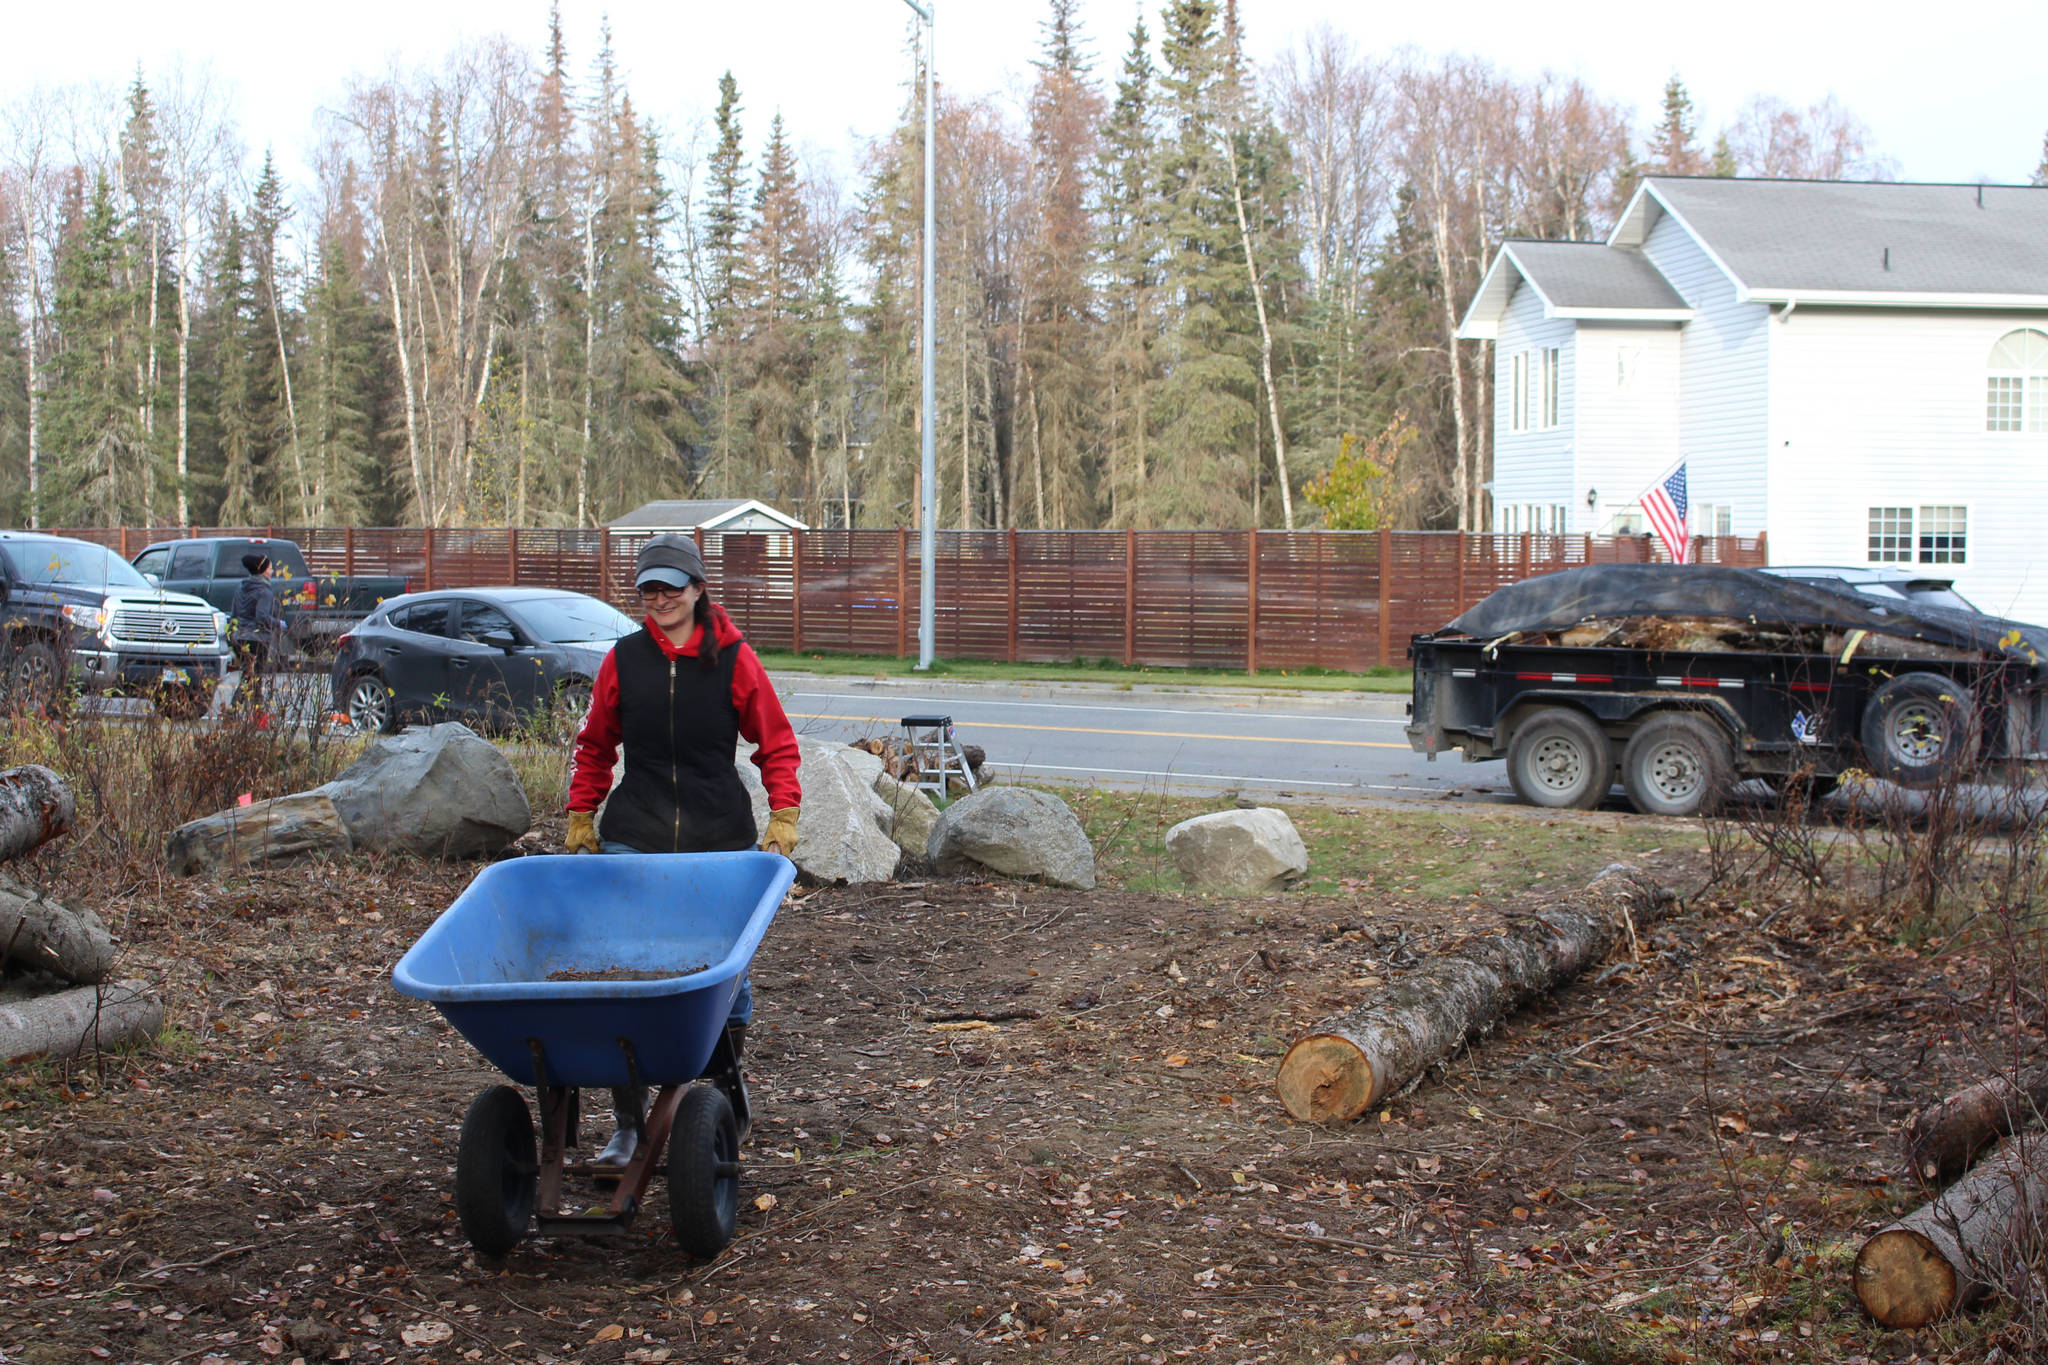 Sarah Pyhala, president of the board for the Shimai Toshi Garden Trails, which is spearheading the Kenai Peninsula Peace Crane Garden Trail, pushes a wheelbarrow while she and other volunteers clear the trail on Marydale Avenue in Soldotna, Alaska, on Oct. 17, 2020. (Photo by Brian Mazurek/Peninsula Clarion)